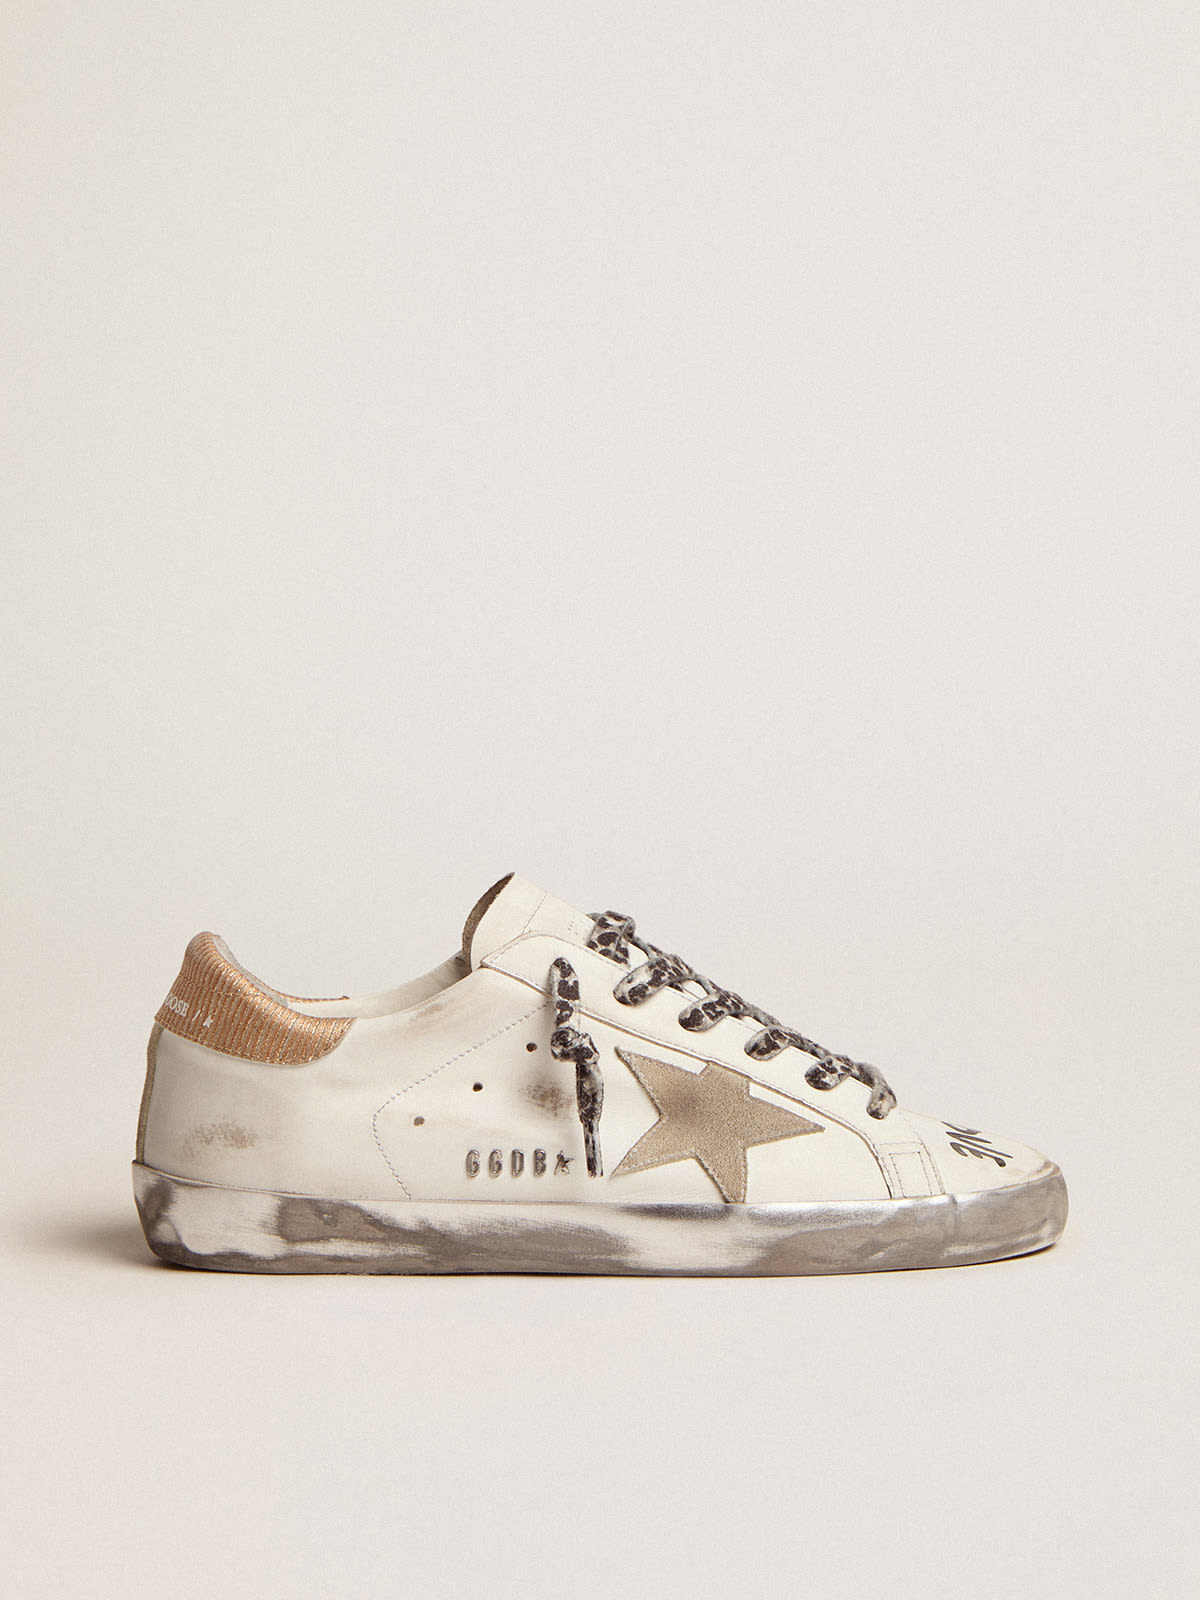 Golden Goose - Women's Super-Star in white leather with gray suede star in 